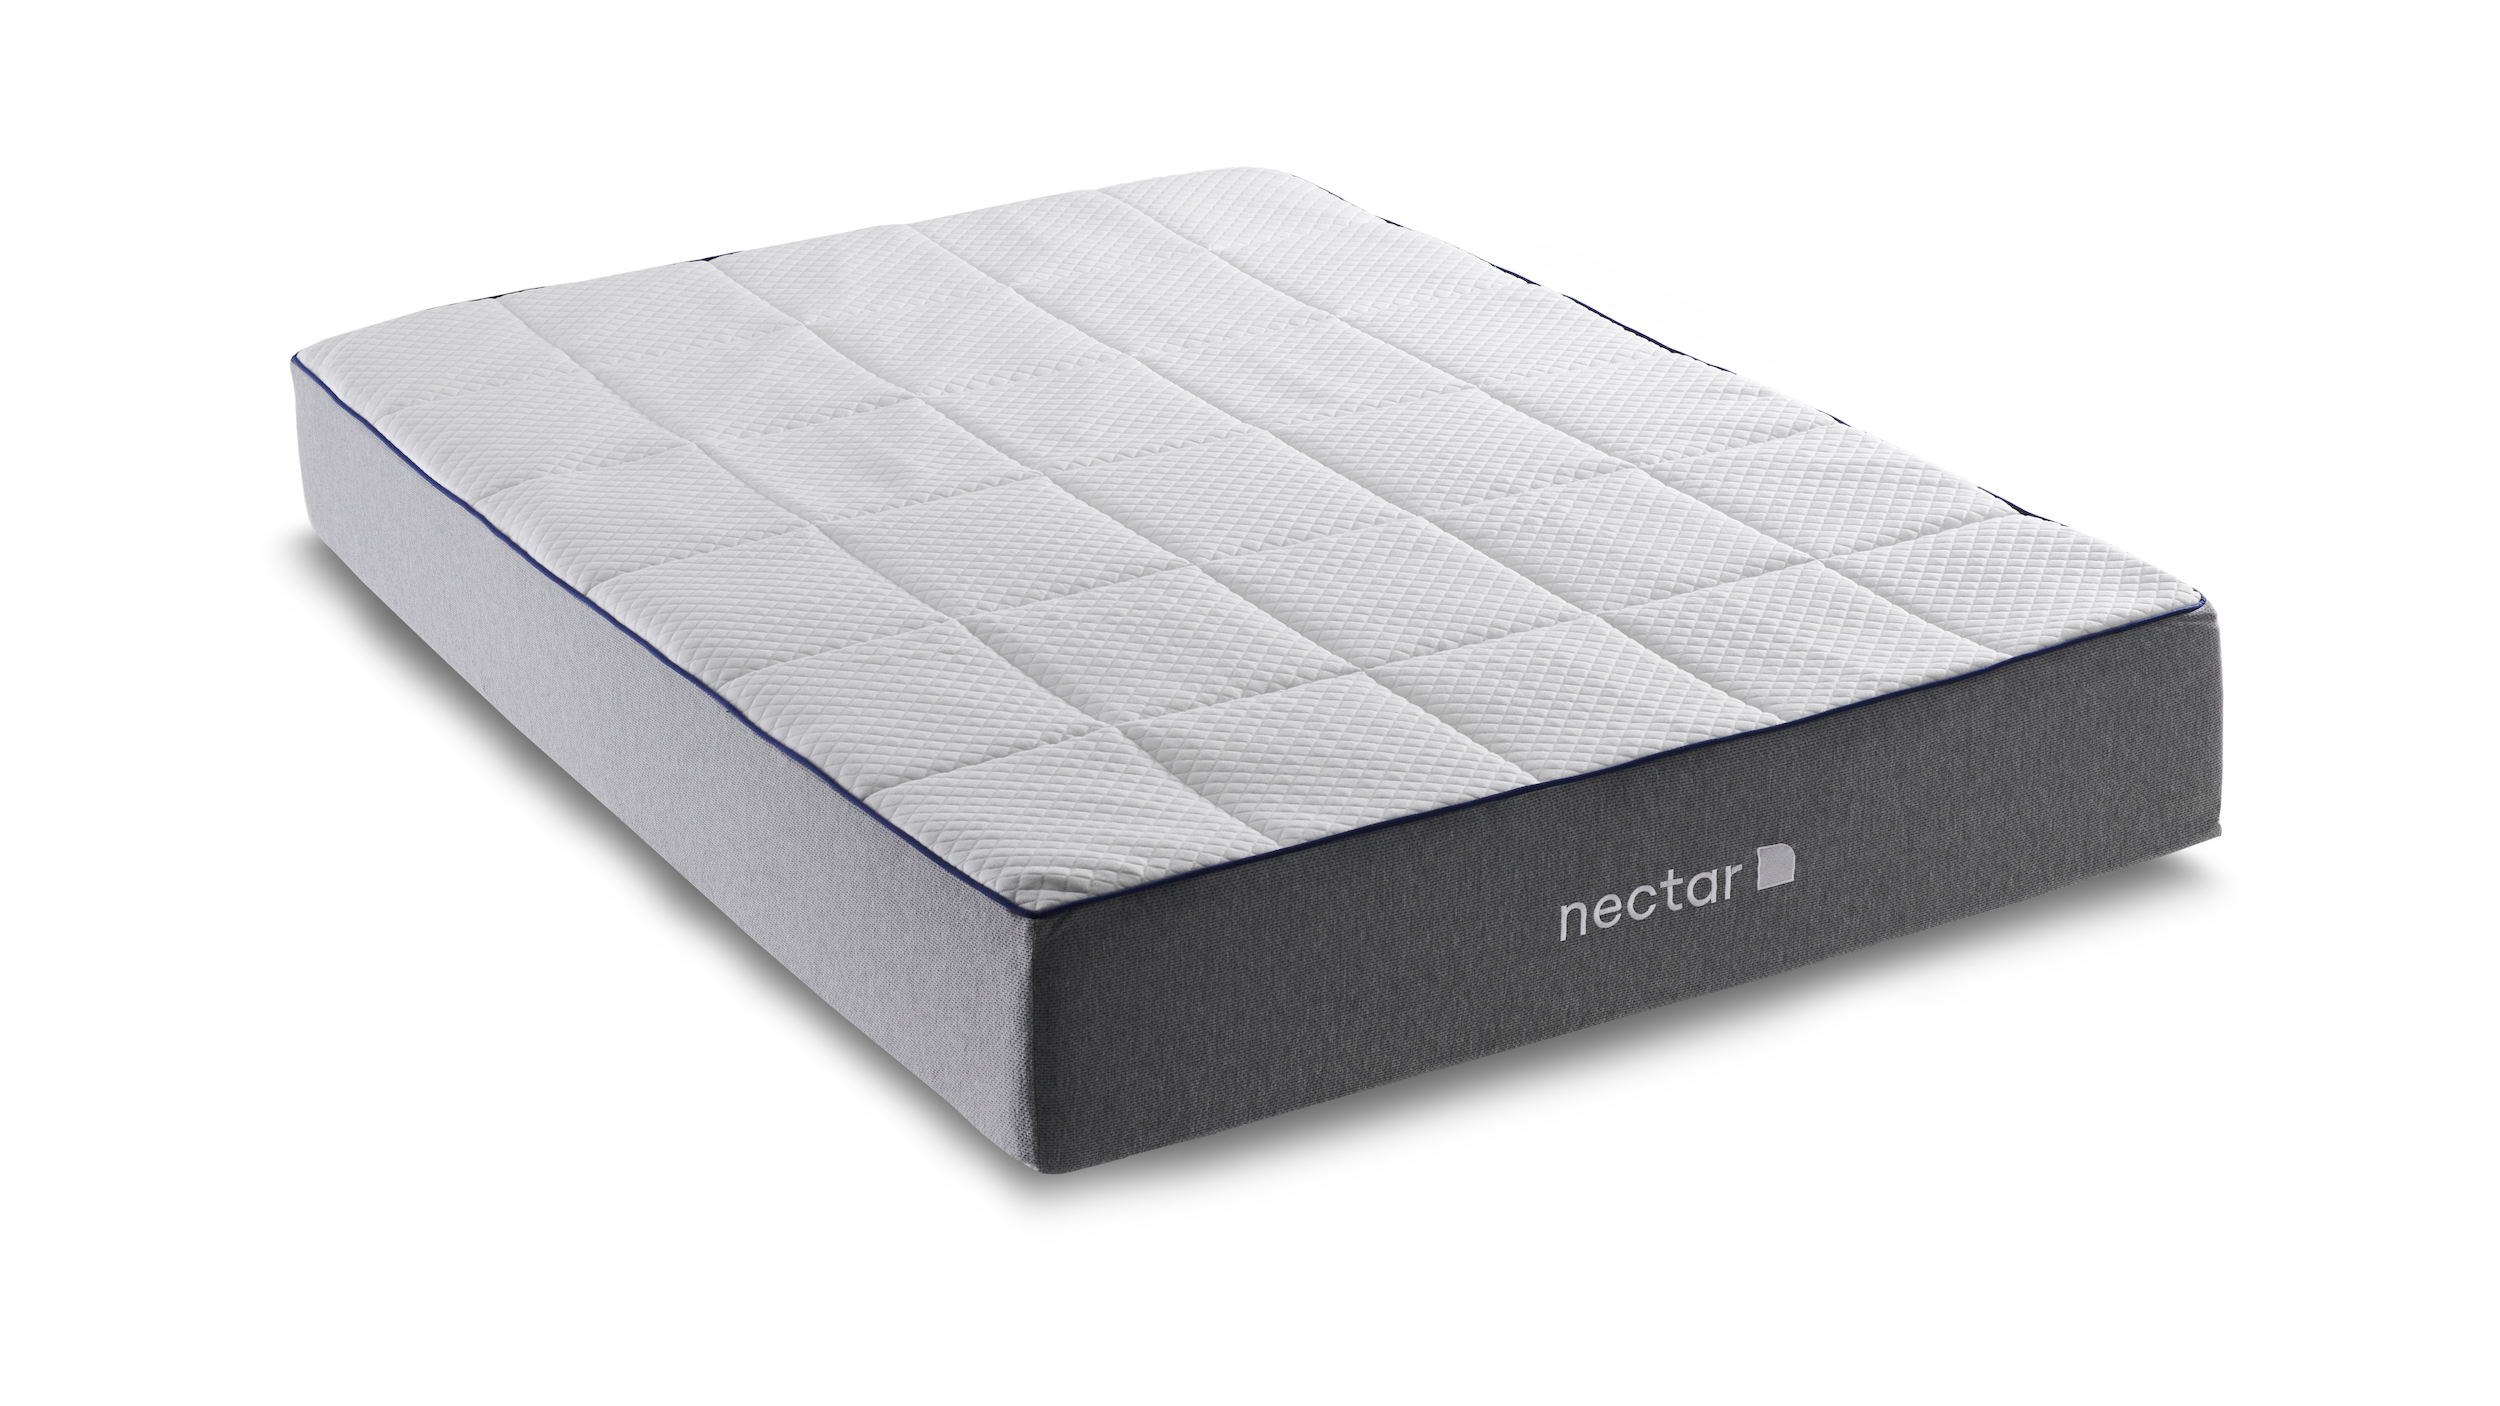 The Nectar Memory Foam Mattress UK shown from the side